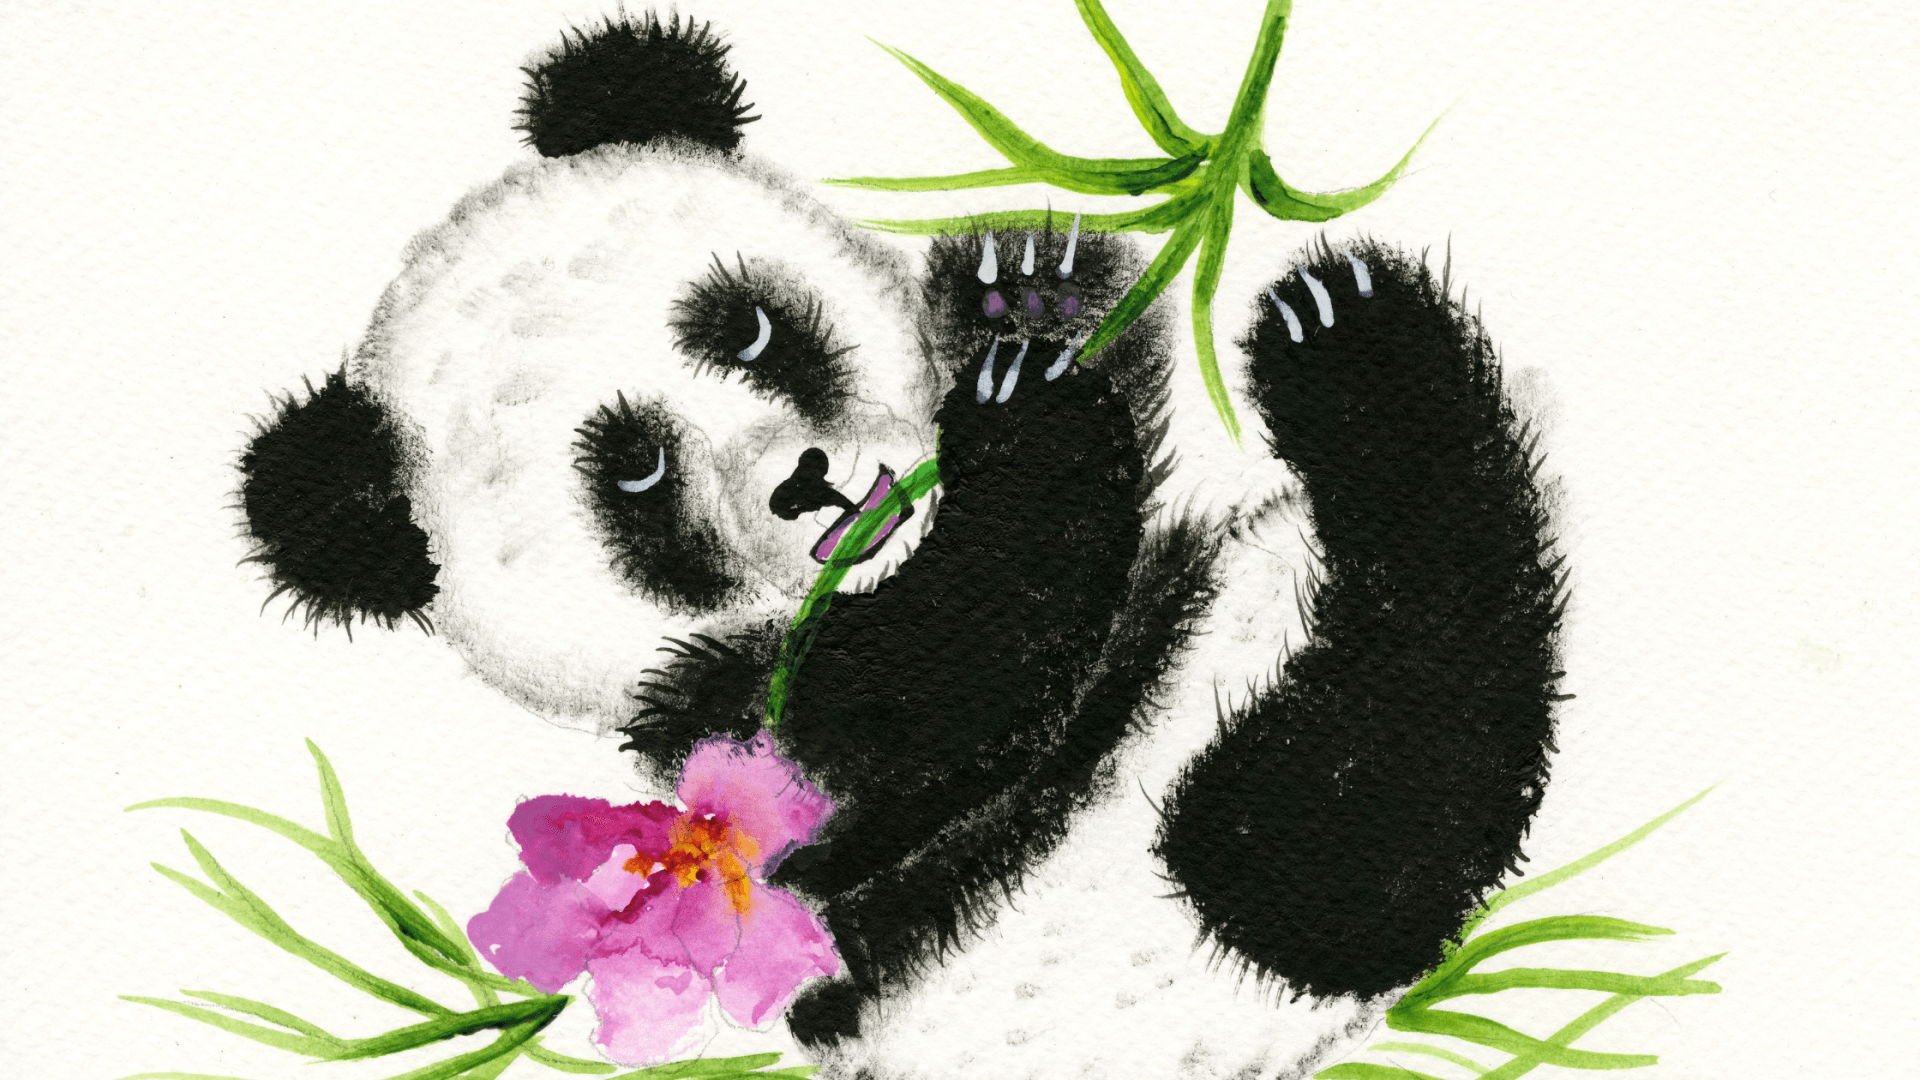 Panda playing with a flower